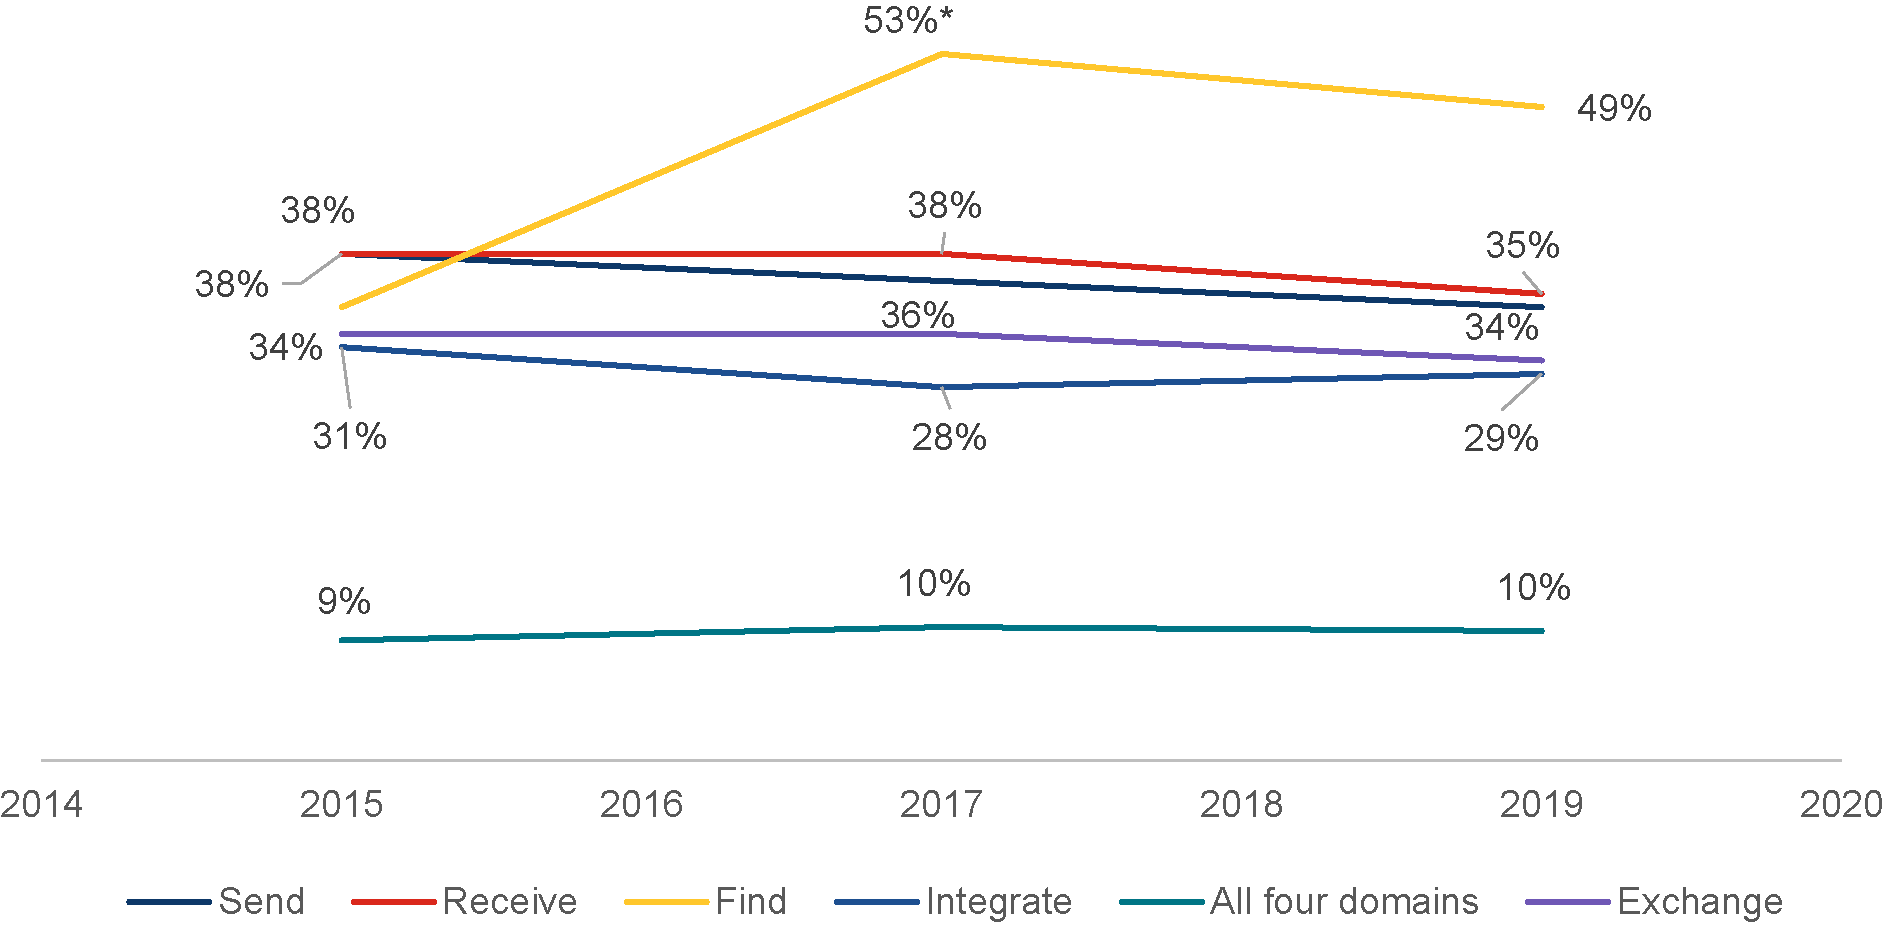 Figure 2. Line chart showing 3 data points per category in 2015, 2017, and 2019. Send: 31%, 28%, 29%. Receive: 38%, 38%, 35%. Find: 34%, 53%*, 49%. Integrate: 31%, 28%, 29%. All four domains: 9%, 10%, 10%. Exchange: 34%, 36%, 34%.